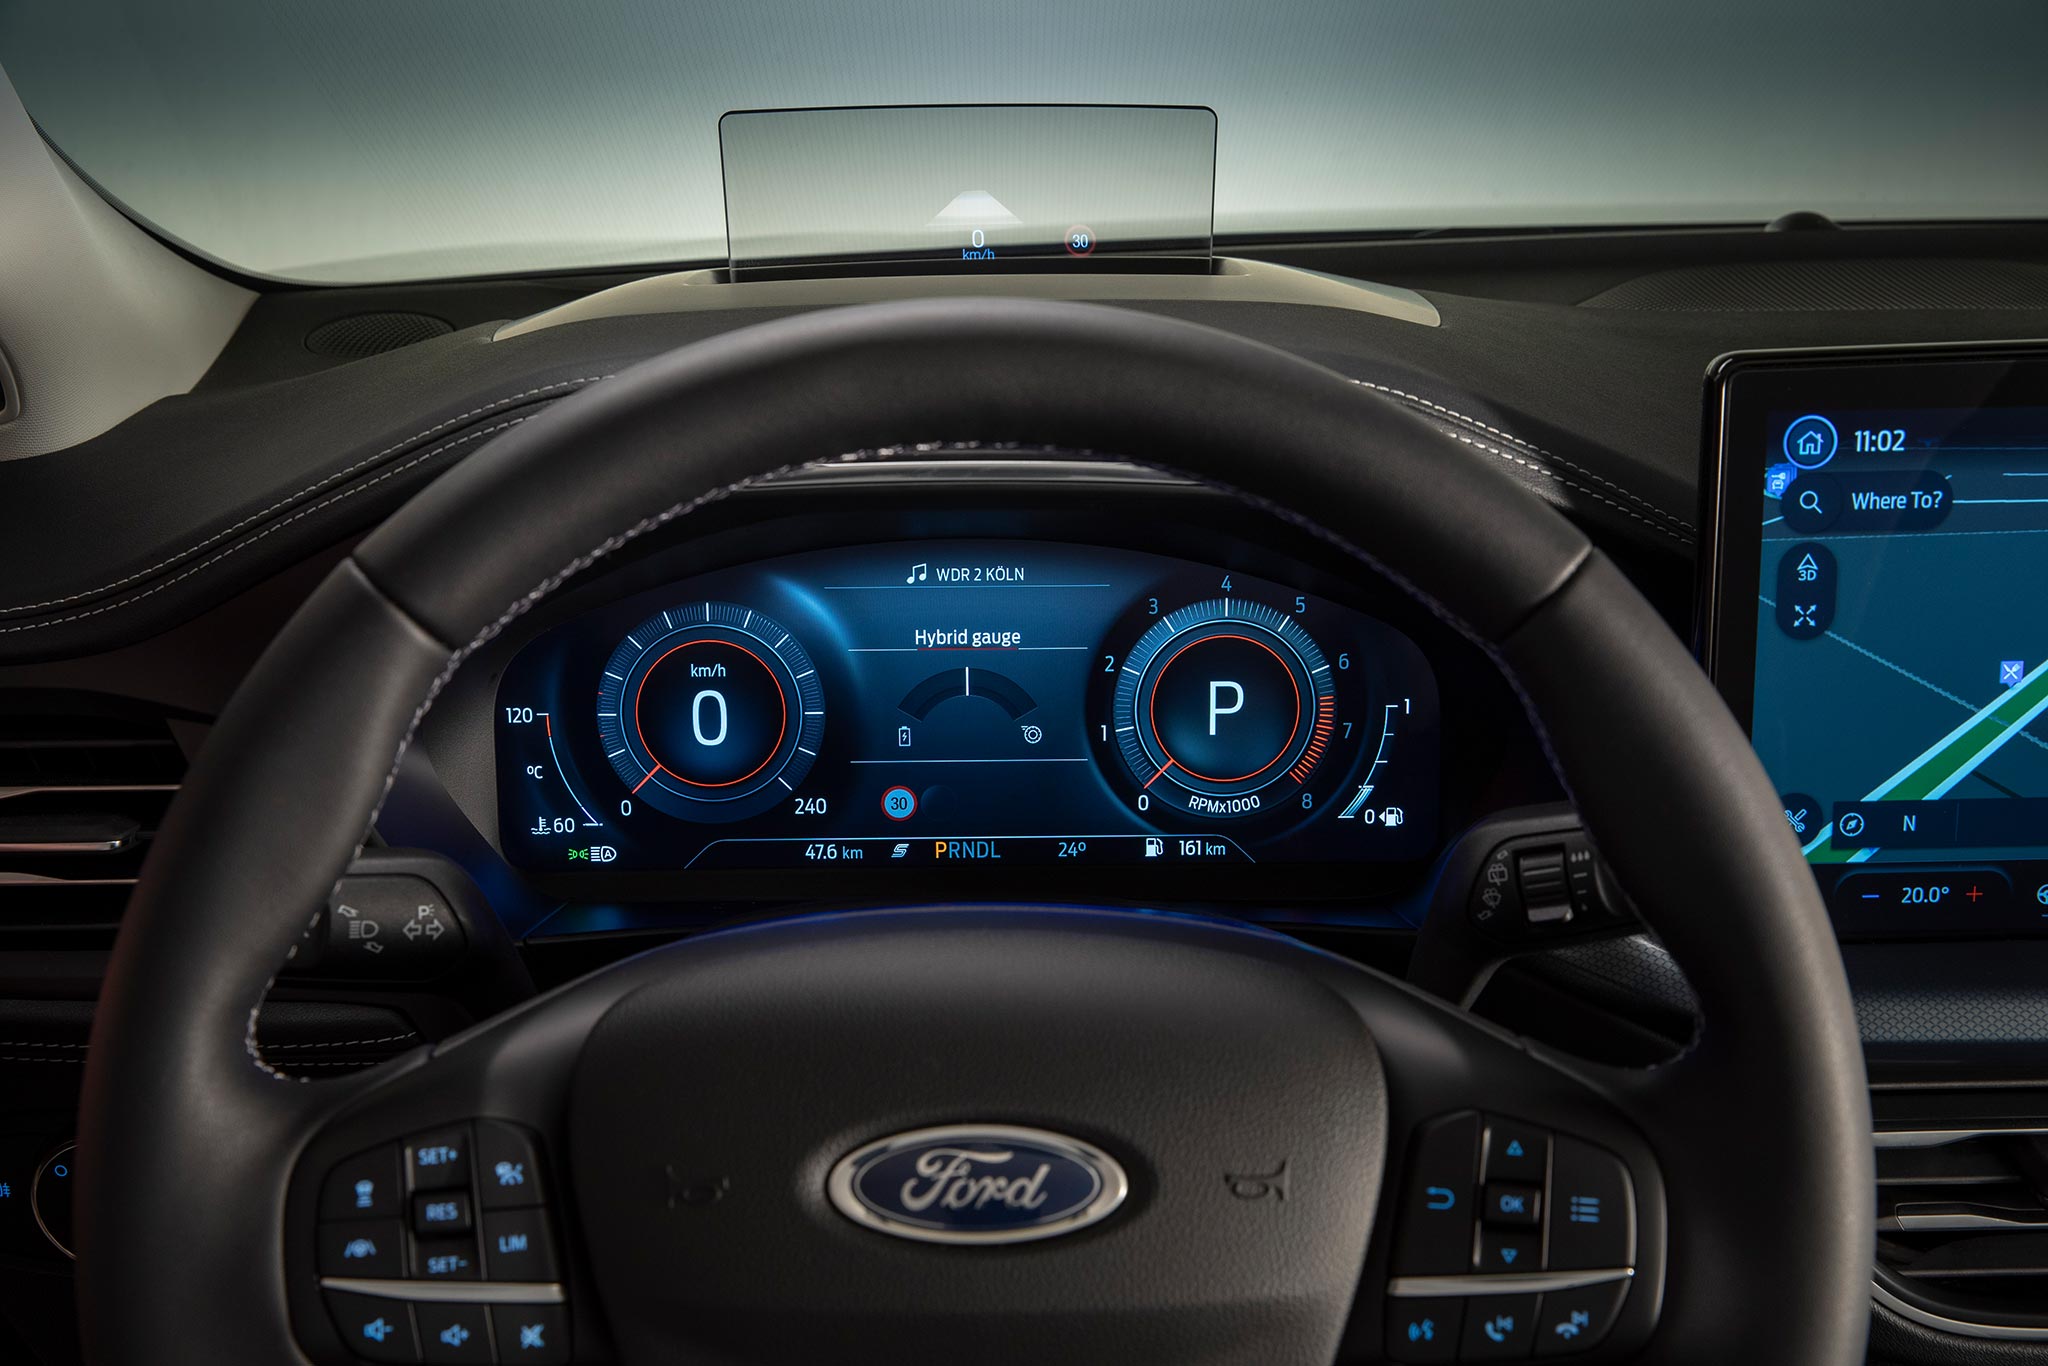 2021 FORD FOCUS ACTIVE INTERIOR SYNC4 21 LOW